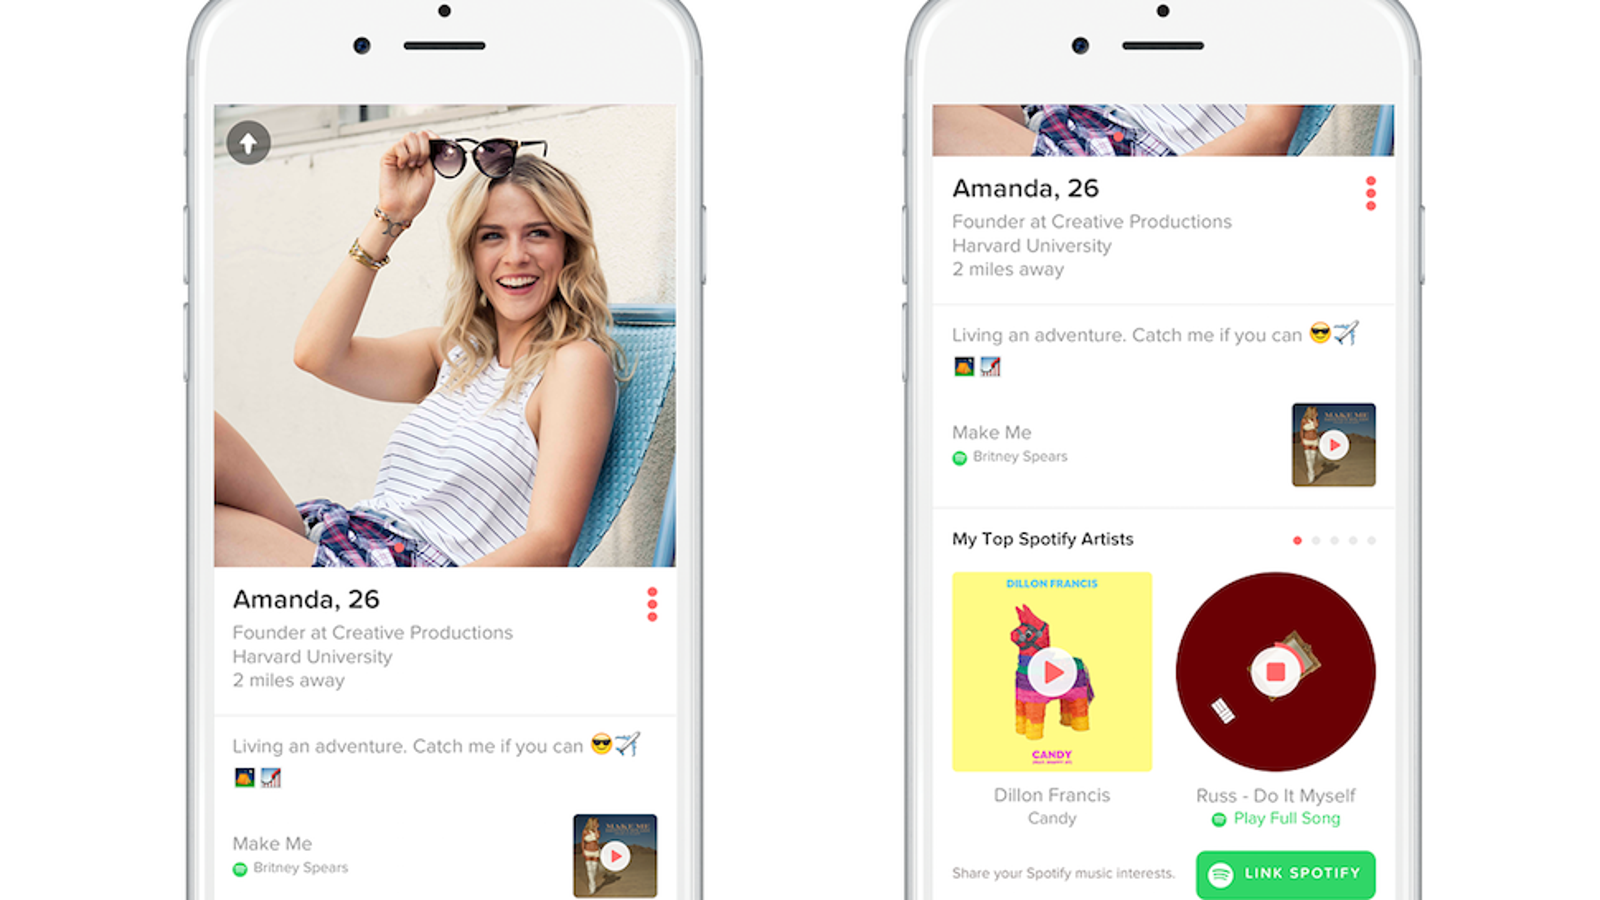 how to change spotify top artists on tinder